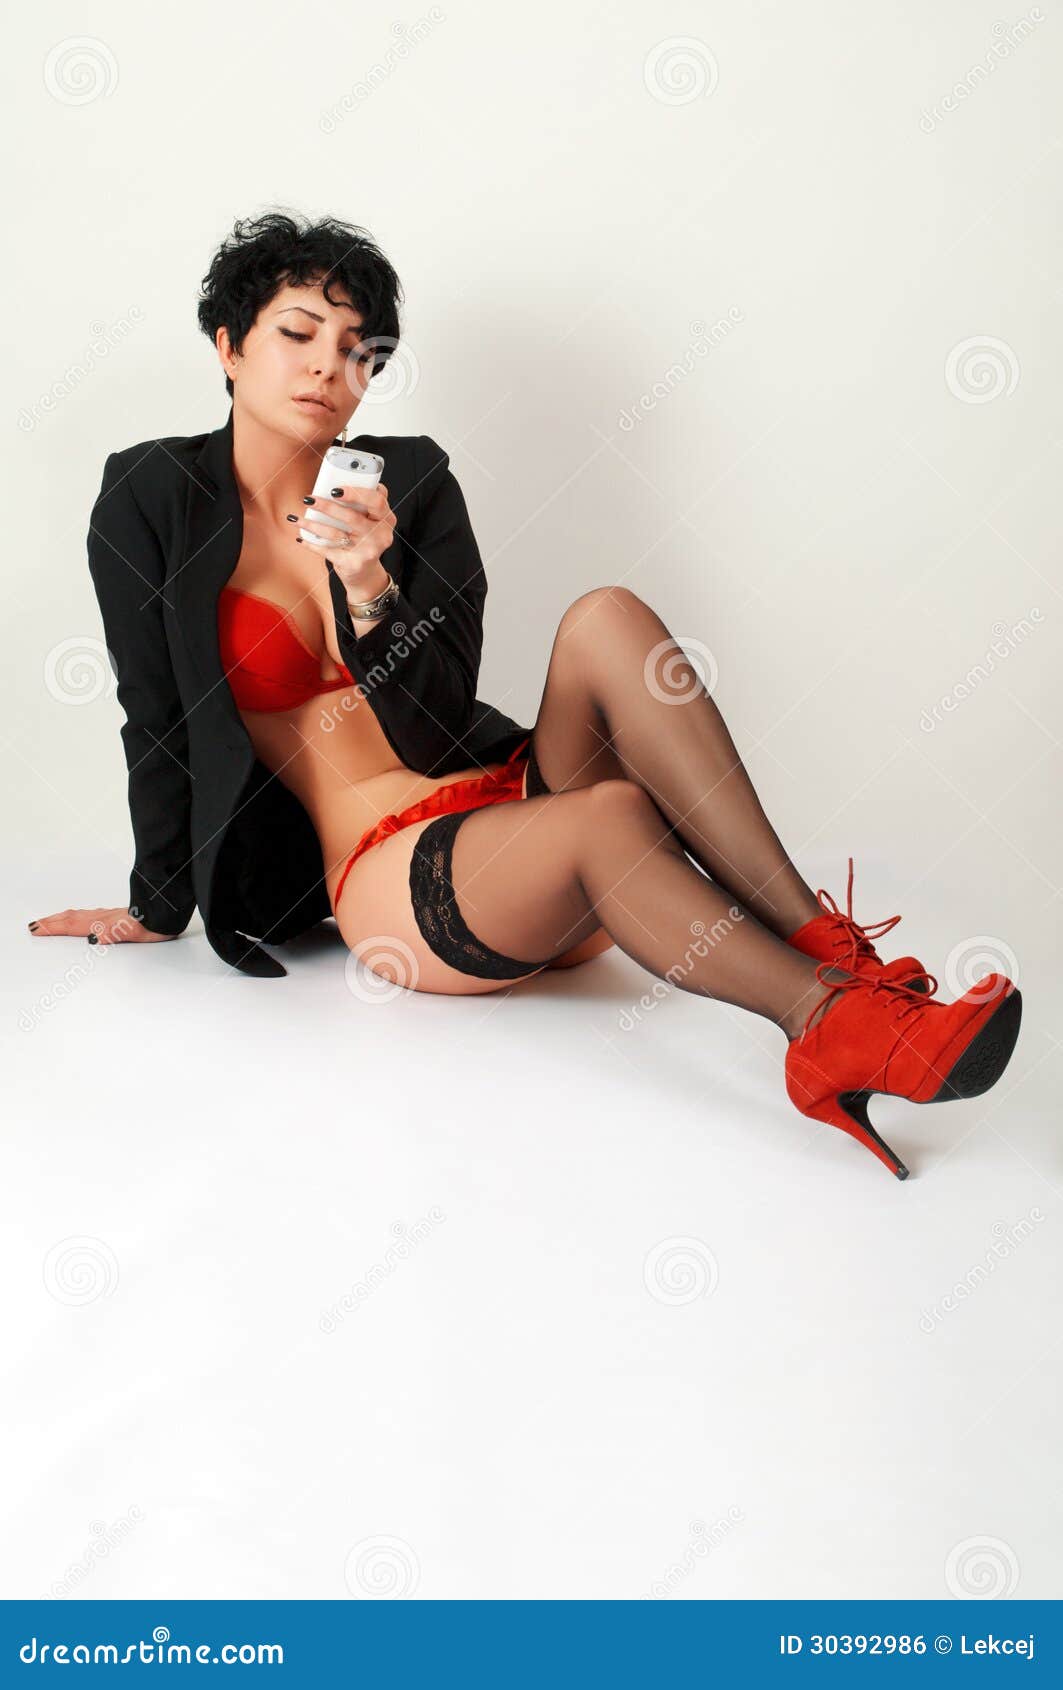 Brunette In Red With Smartphone Royalty Free Stock Image Image 30392986